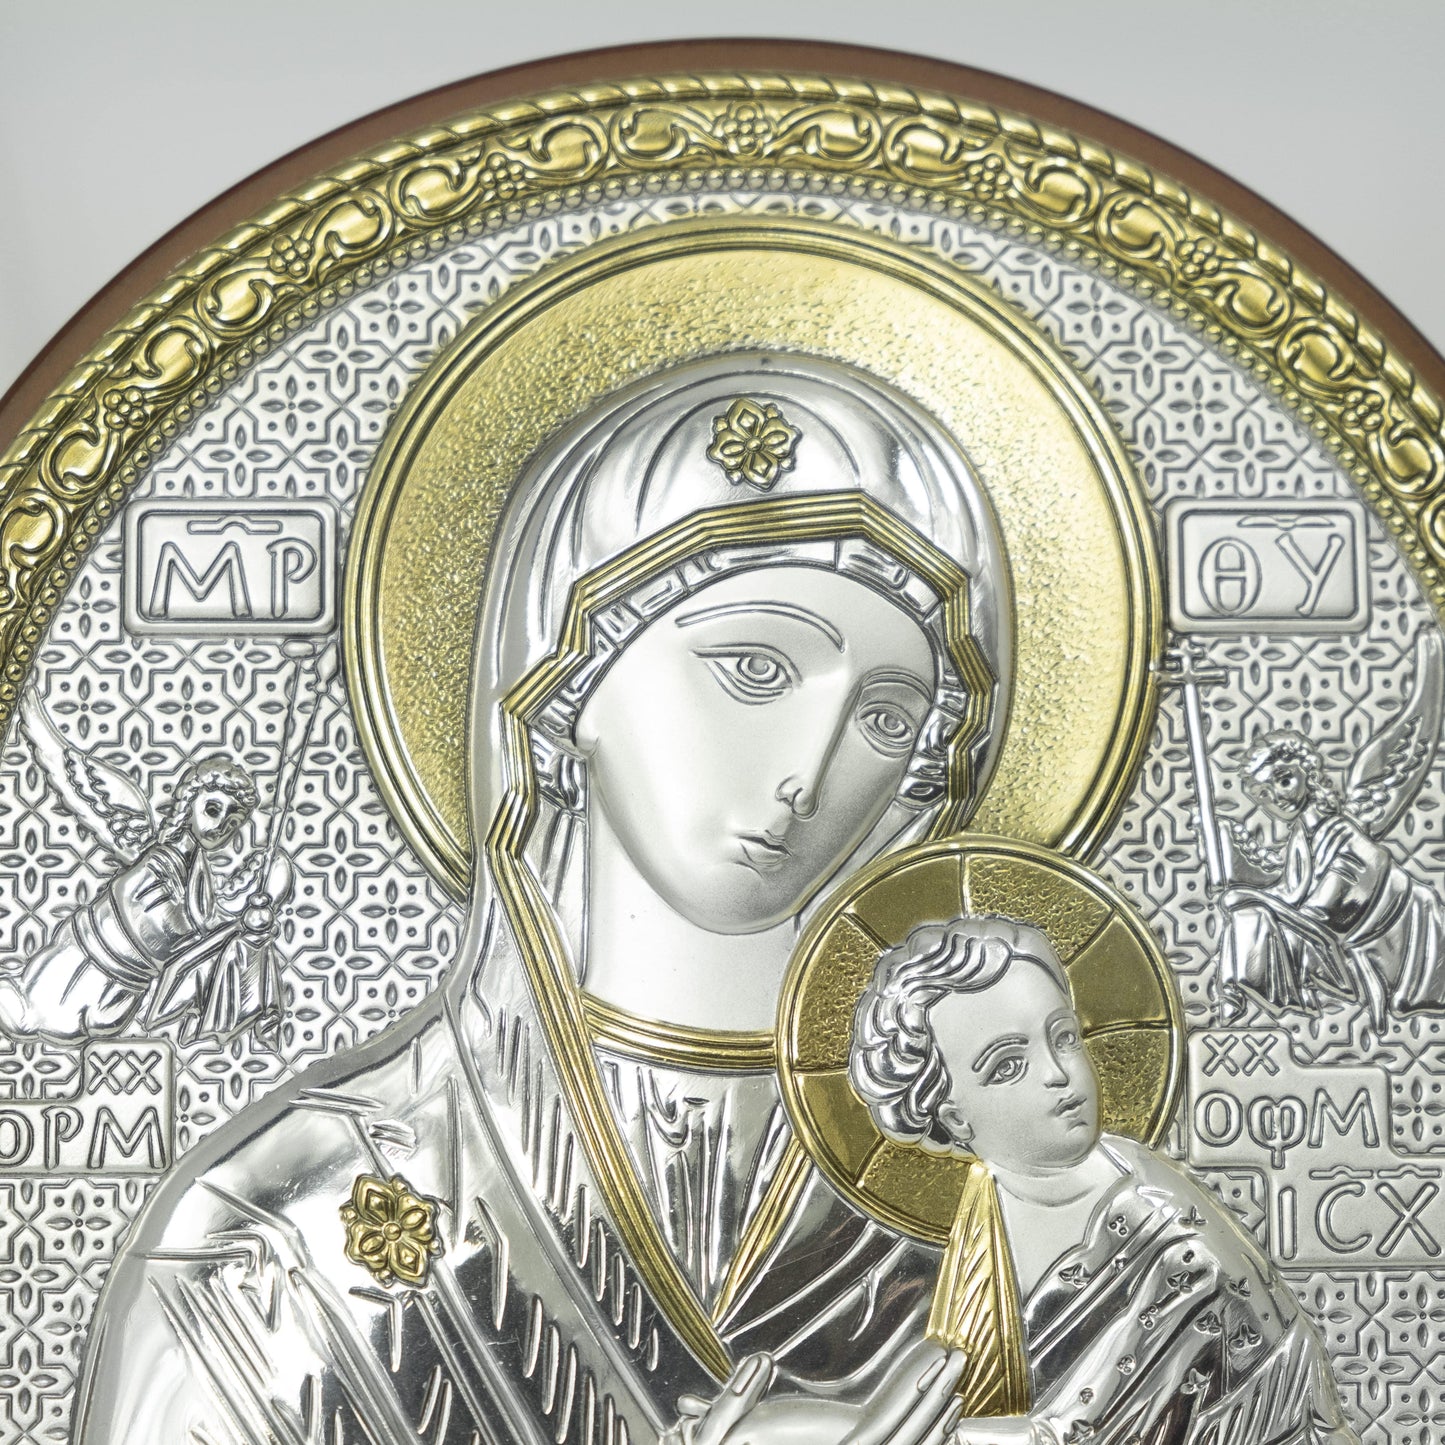 MONDO CATTOLICO Our Lady of Perpetual Help Bilaminated Sterling Silver and Golden Details